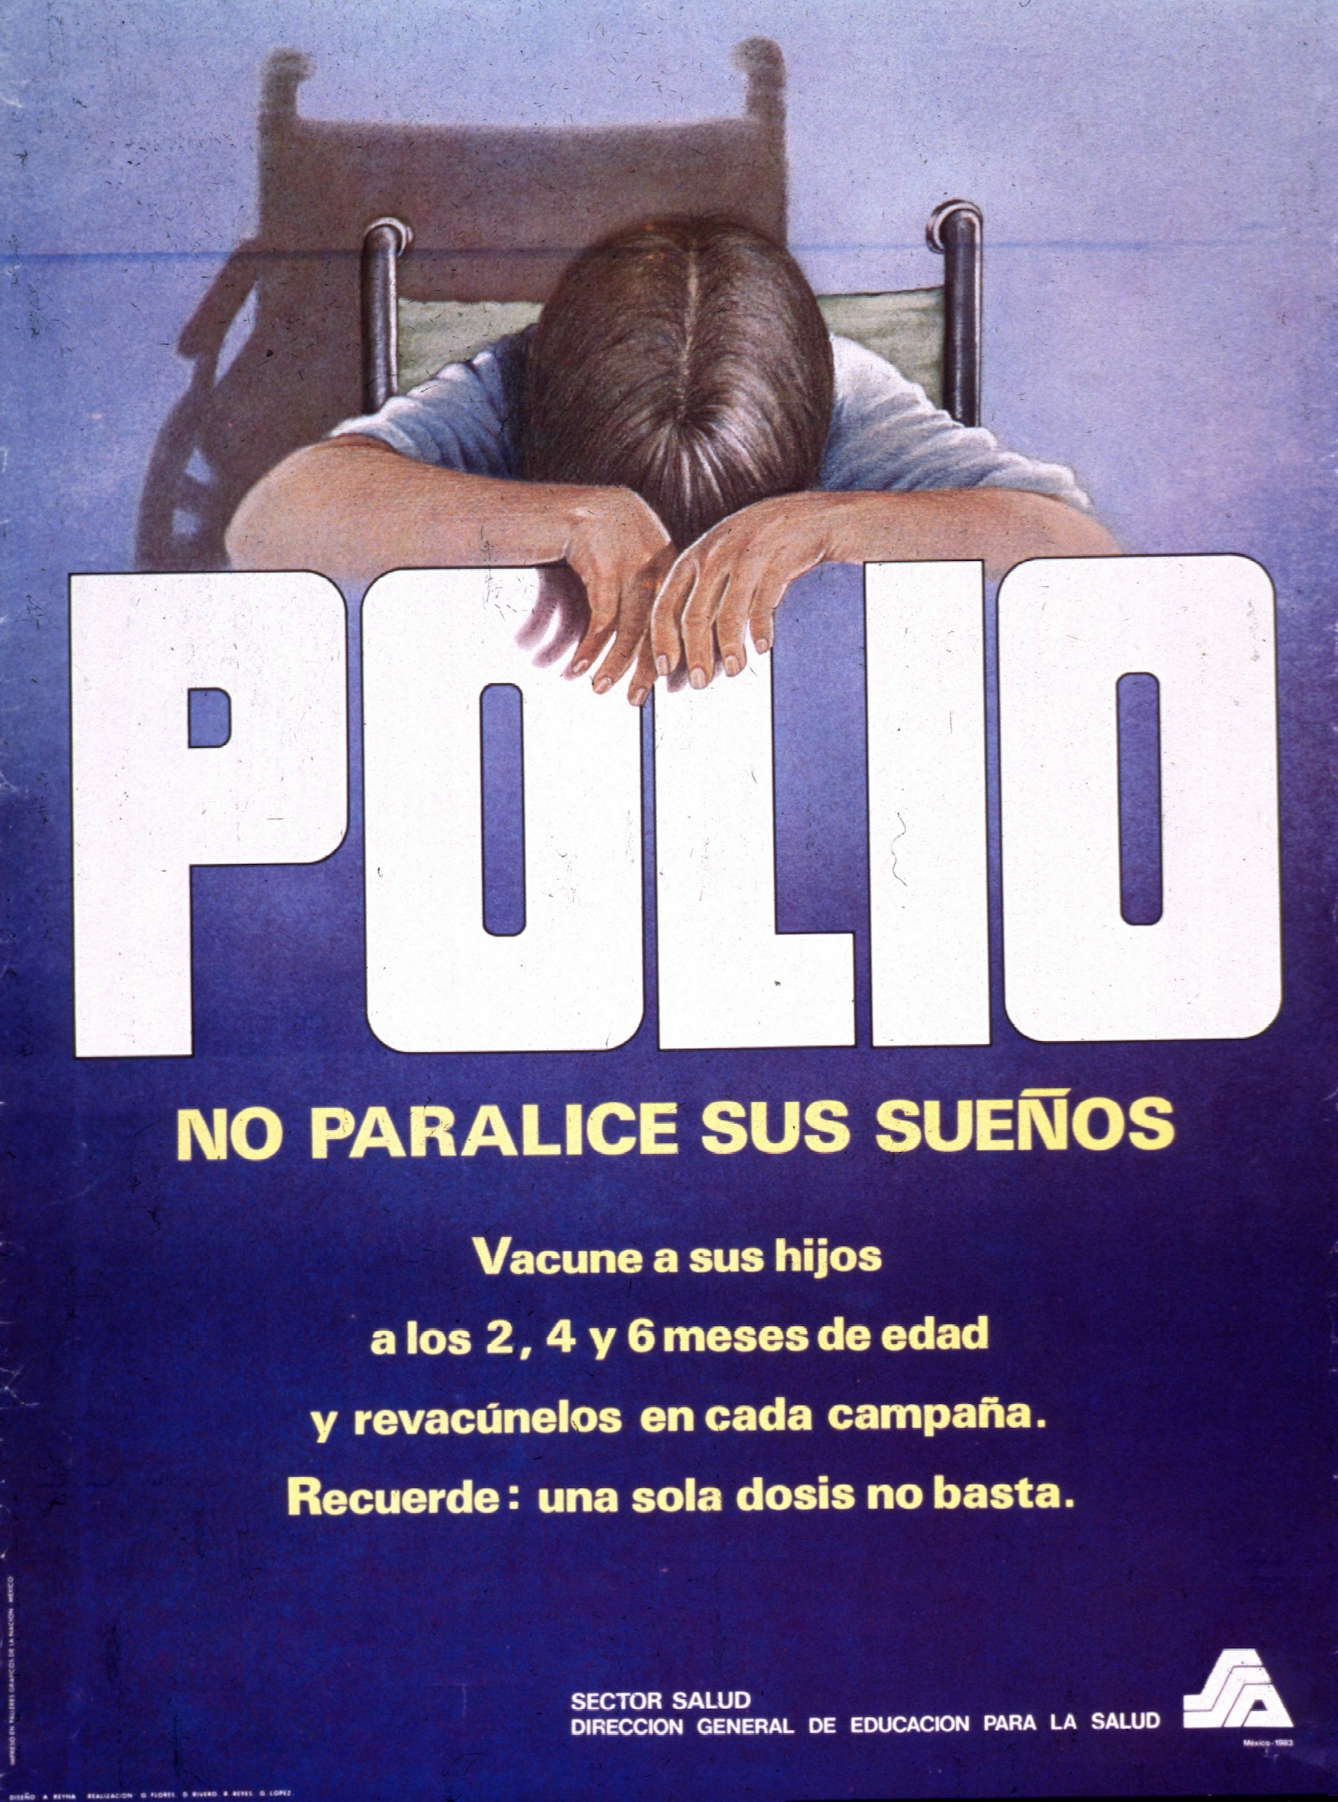 Predominantly blue poster with white and yellow lettering. Visual image at top of poster is an illustration of a person in a wheelchair slumped over the title word "Polio." Title below illustration, caption below title. Caption provides a schedule for polio vaccinations and a reminder that one dose of the vaccine is not enough.